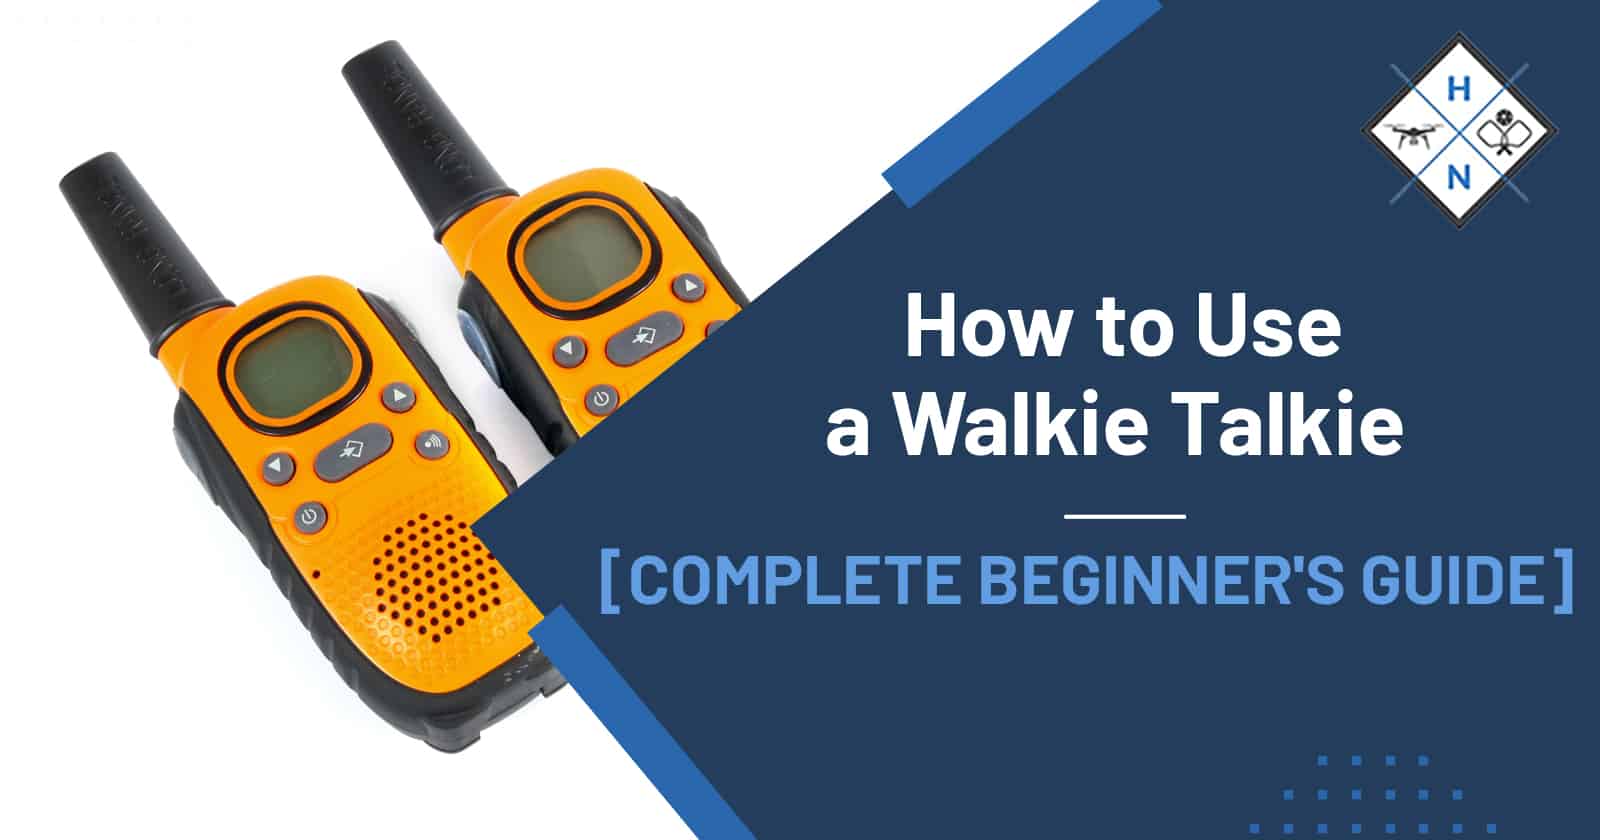 How to Use a Walkie Talkies [COMPLETE BEGINNER'S GUIDE]